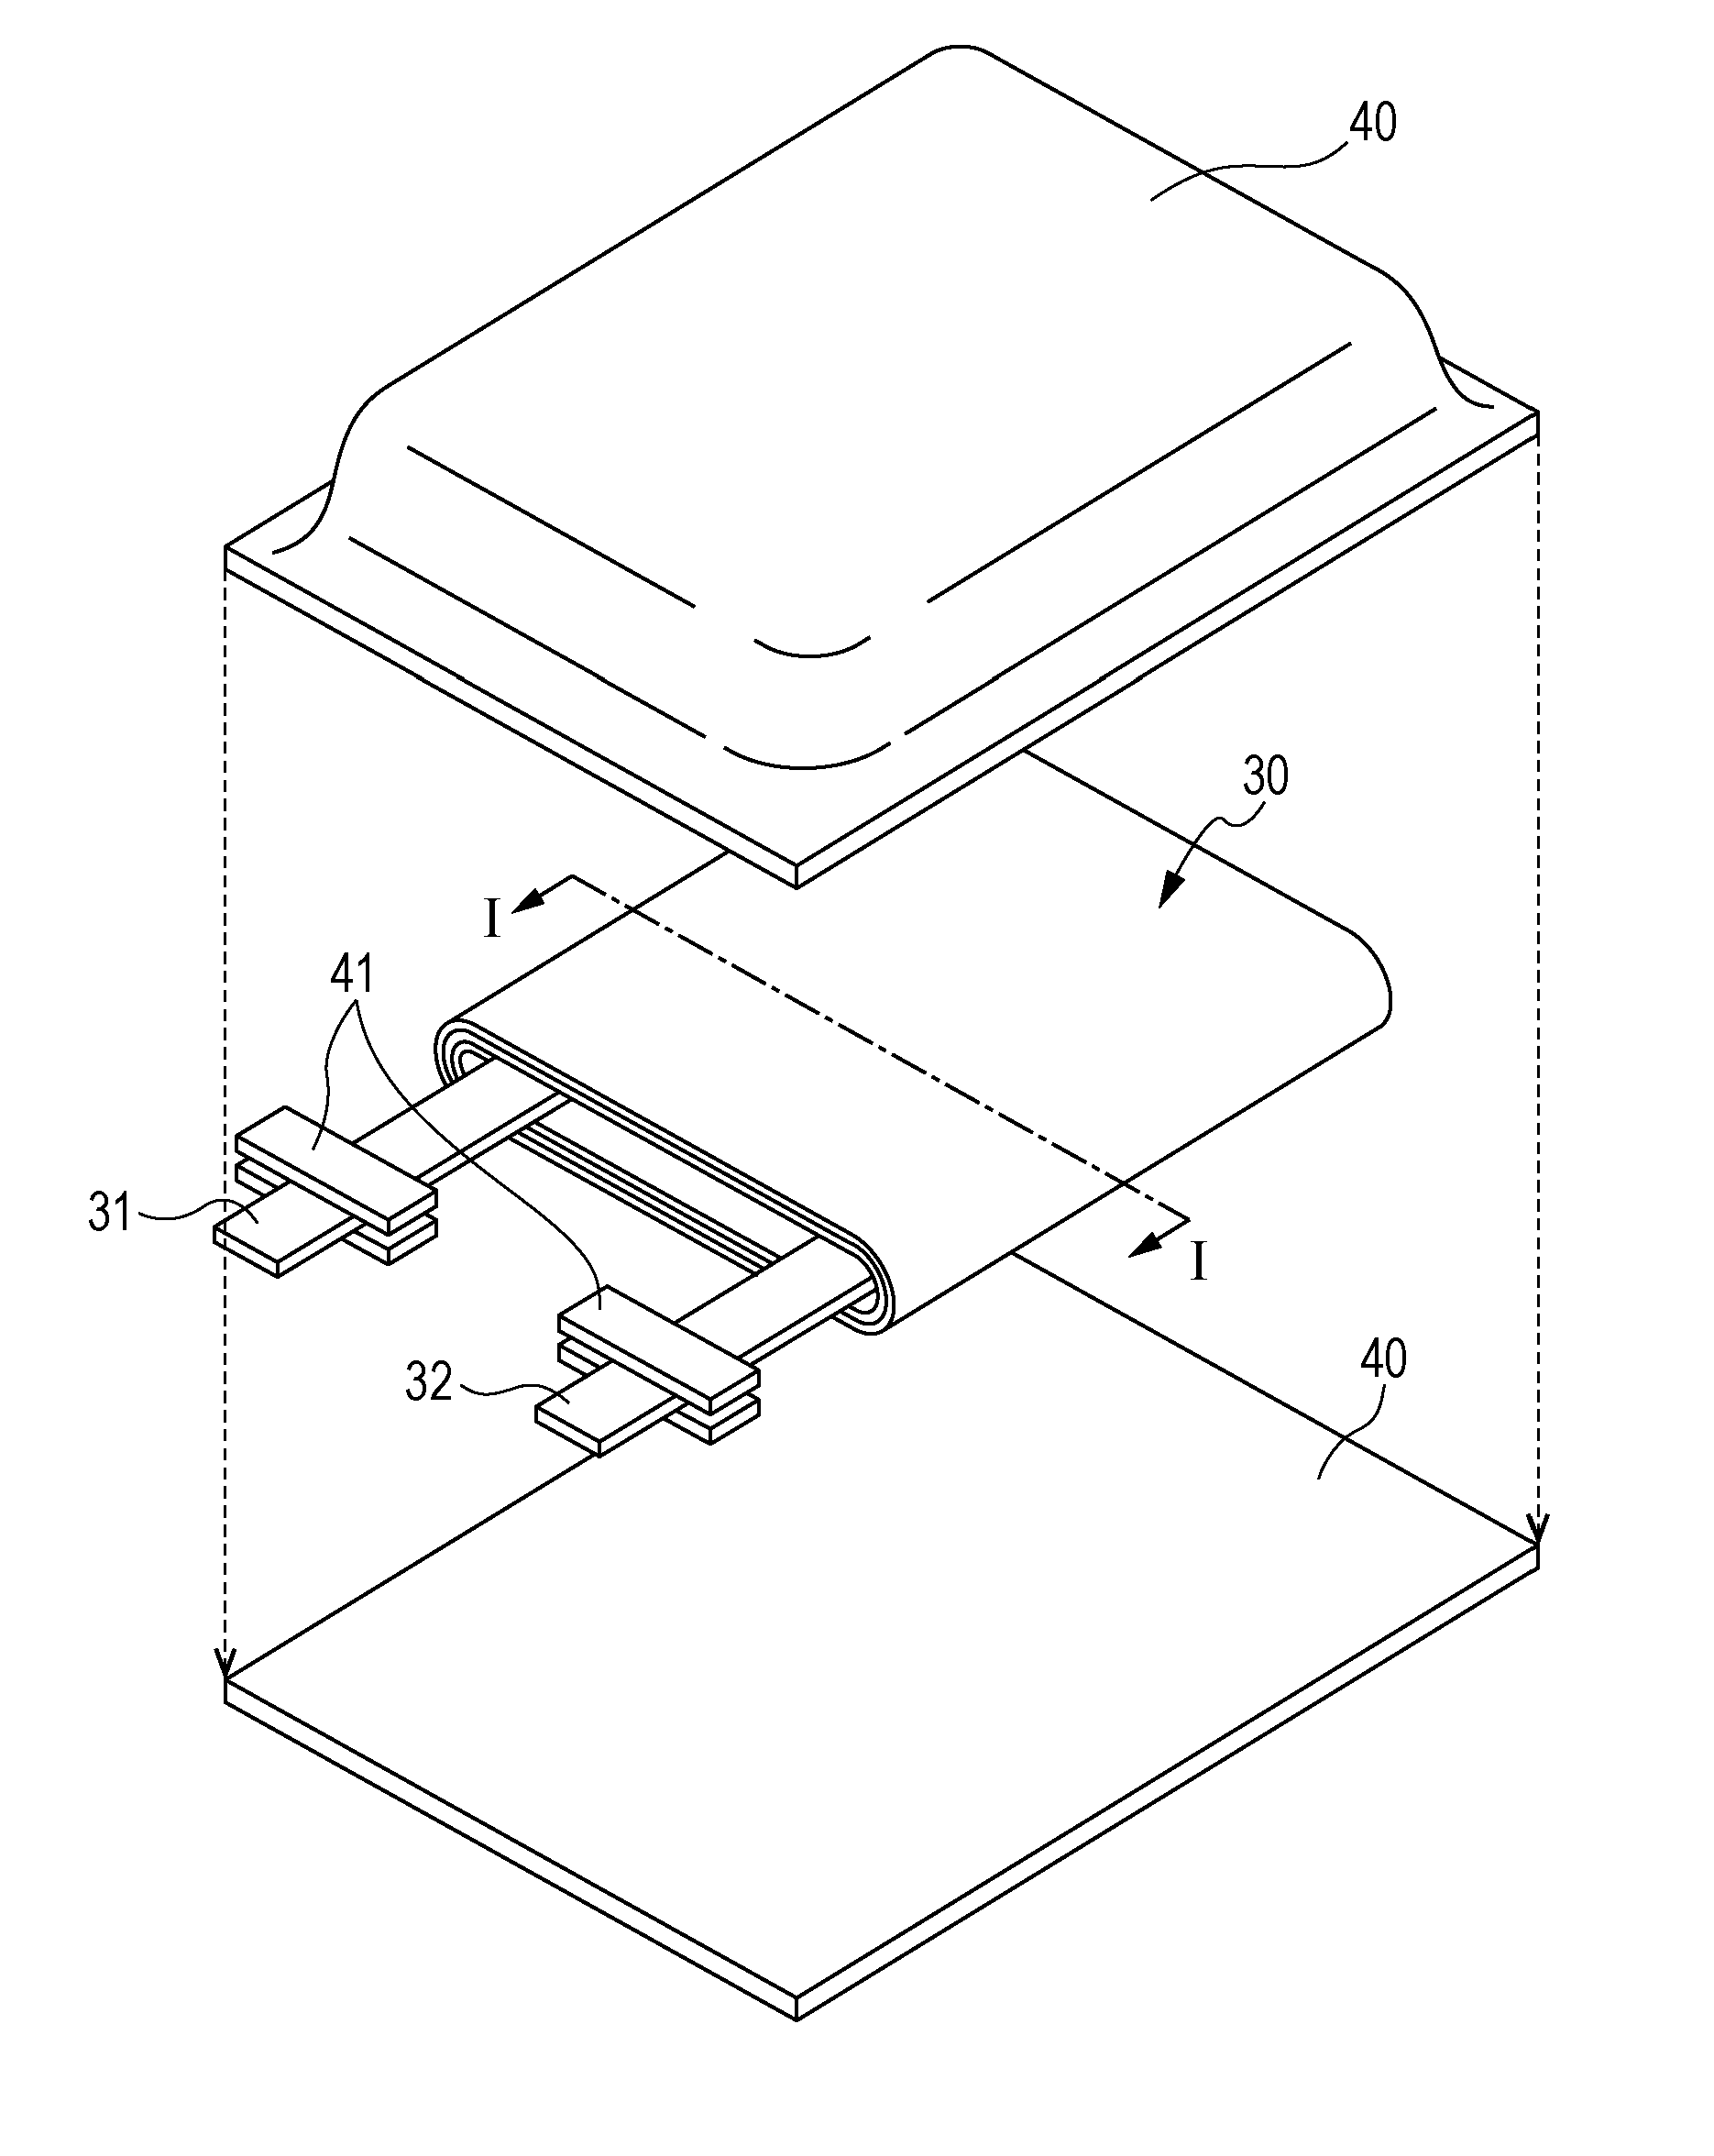 Battery, battery pack, electronic apparatus, electrically driven vehicle, electrical storage device, and power system